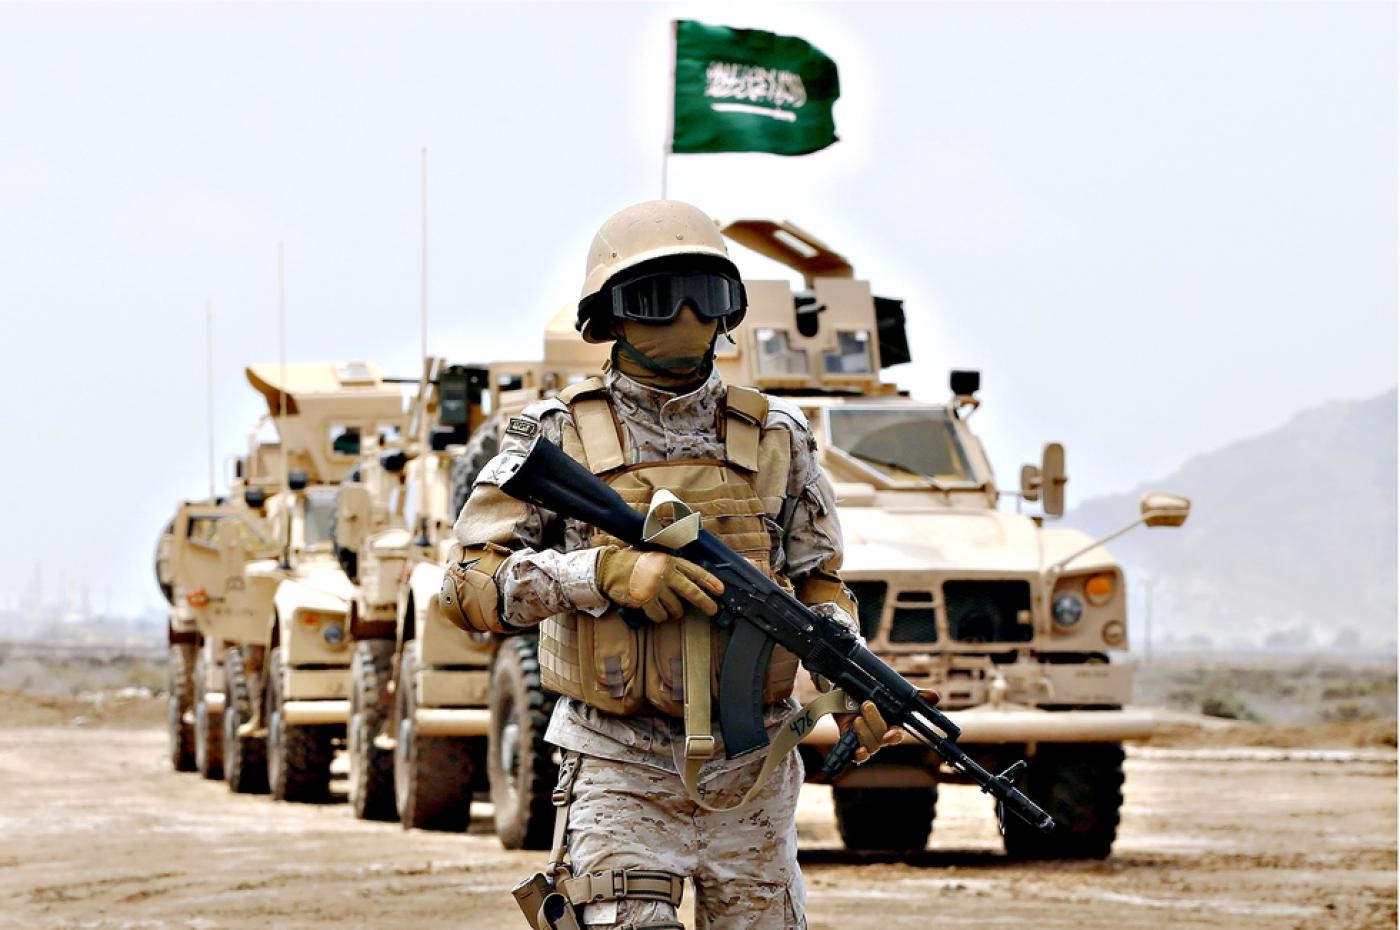 A member of the Saudi forces stands to attention during a presidential visit in Yemen.